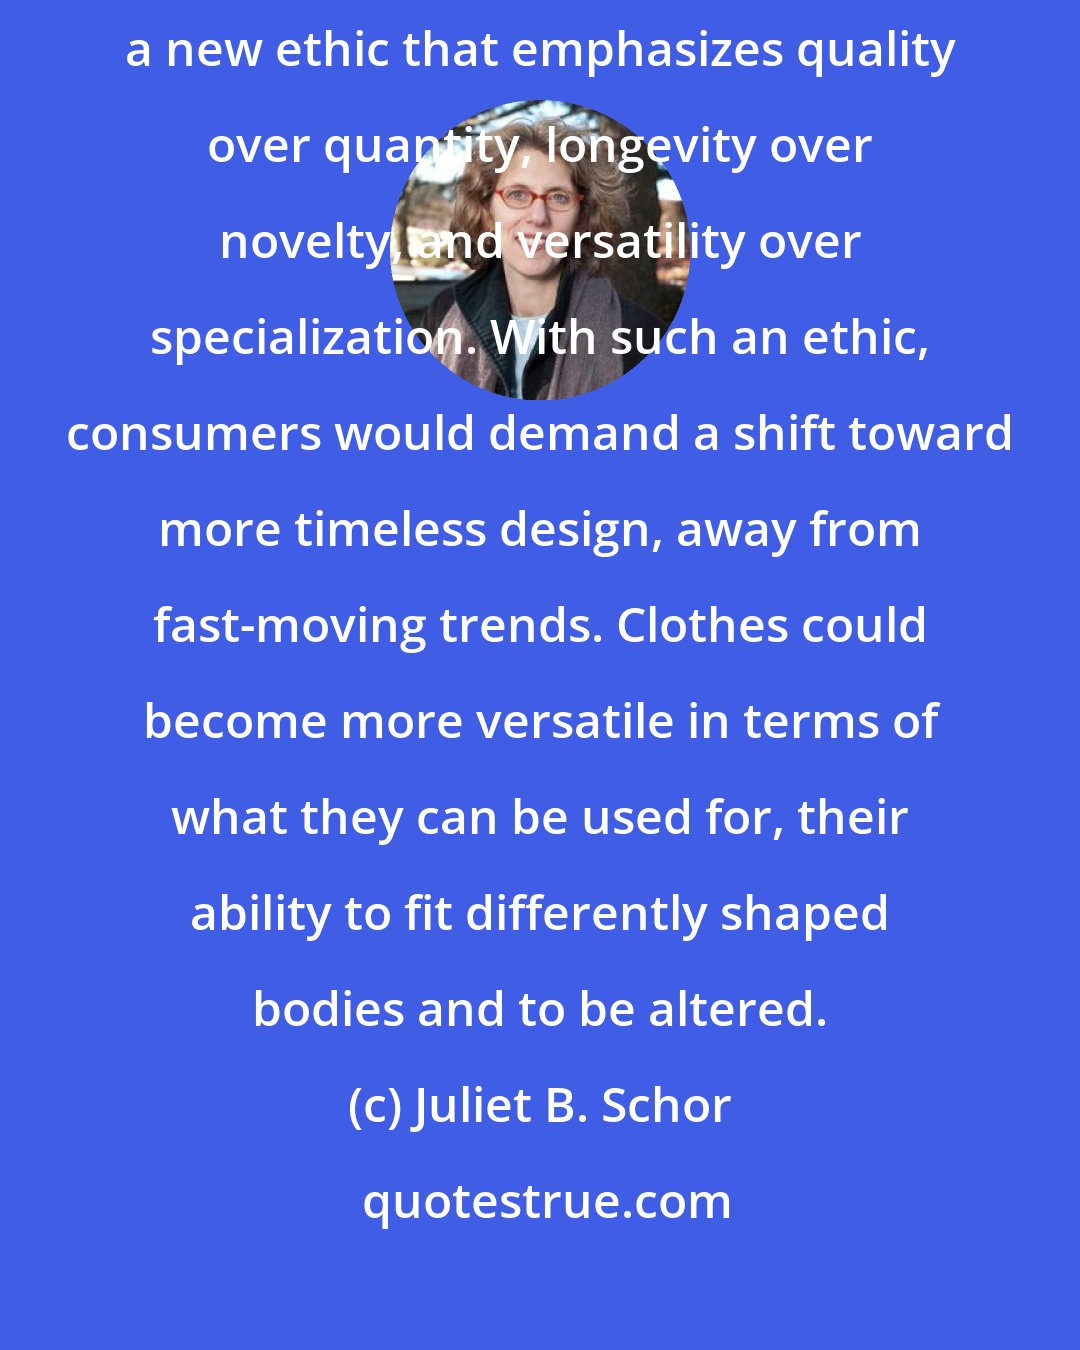 Juliet B. Schor: The history of clothing practices provides guidance for fashioning a new ethic that emphasizes quality over quantity, longevity over novelty, and versatility over specialization. With such an ethic, consumers would demand a shift toward more timeless design, away from fast-moving trends. Clothes could become more versatile in terms of what they can be used for, their ability to fit differently shaped bodies and to be altered.